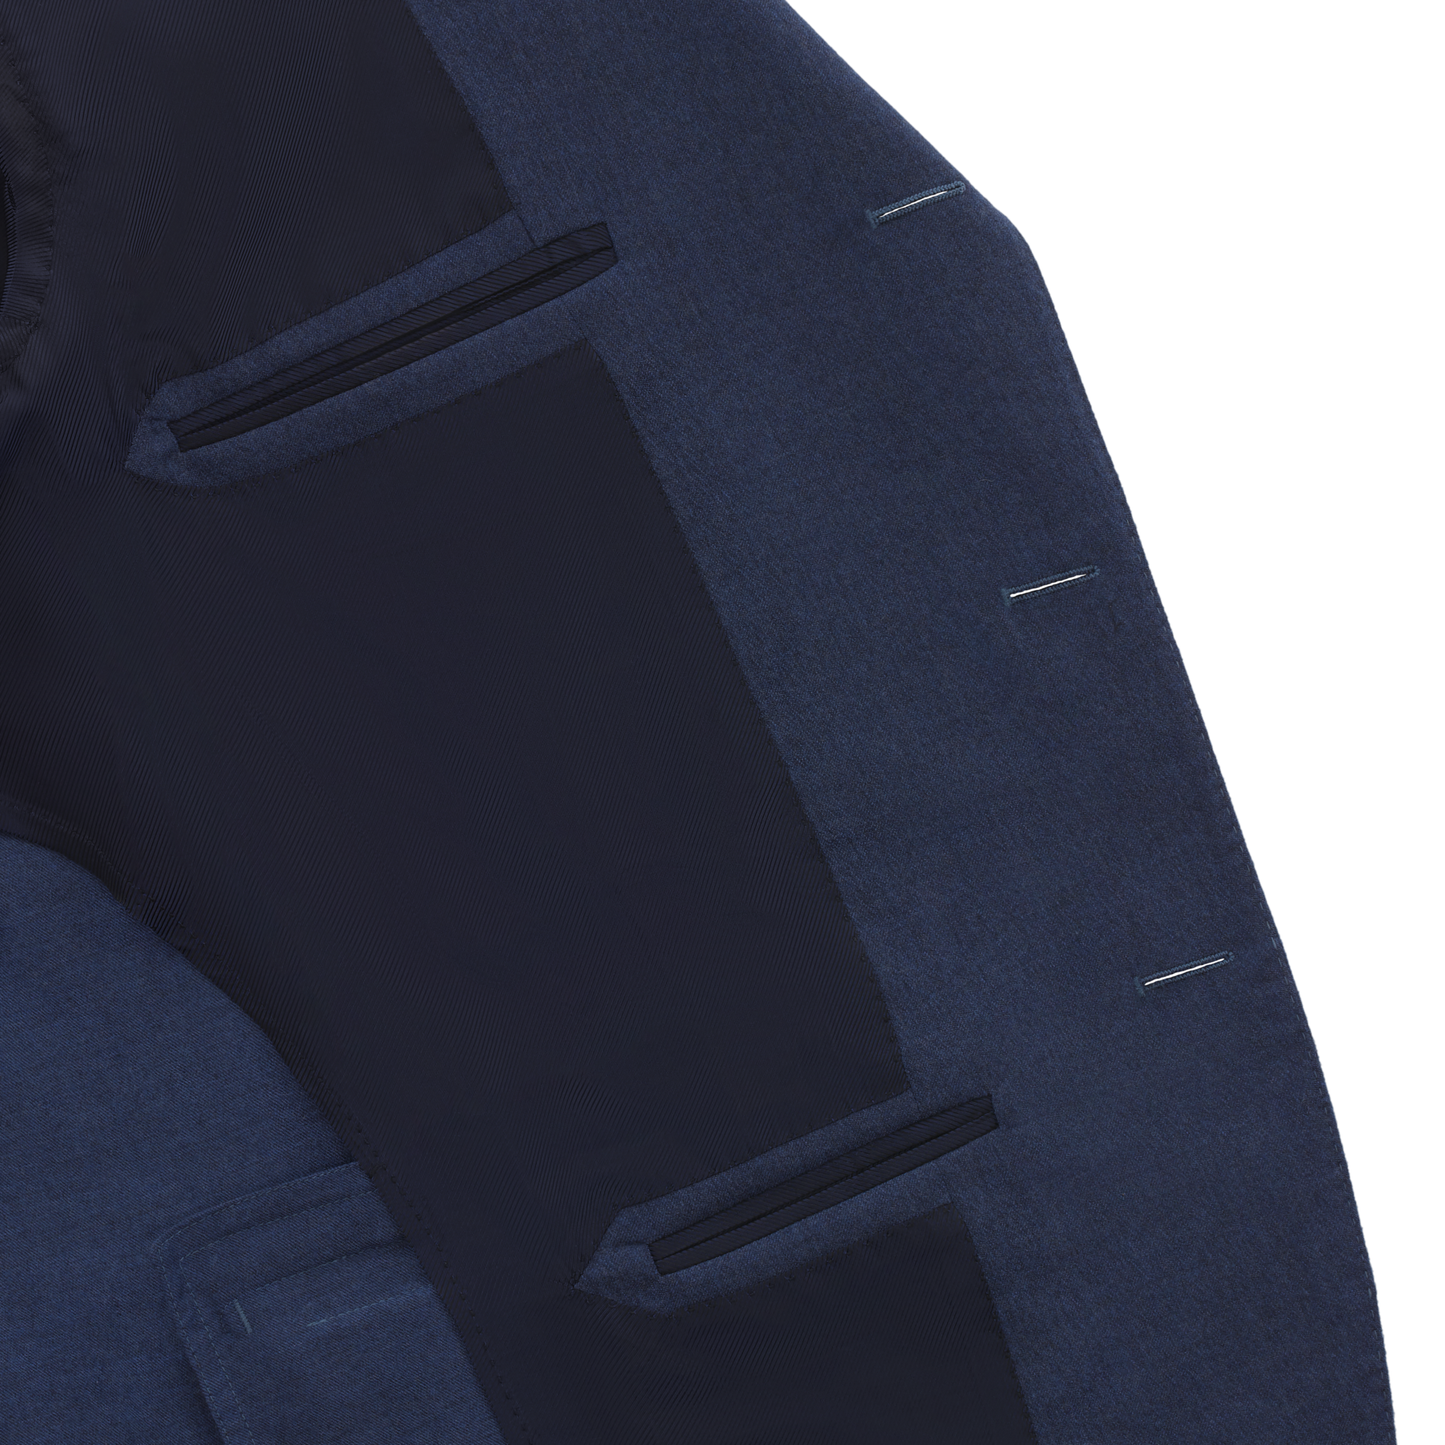 De Petrillo Single-Breasted Classic Virgin Wool Suit in Blue. Exclusively Made for Sartale - SARTALE